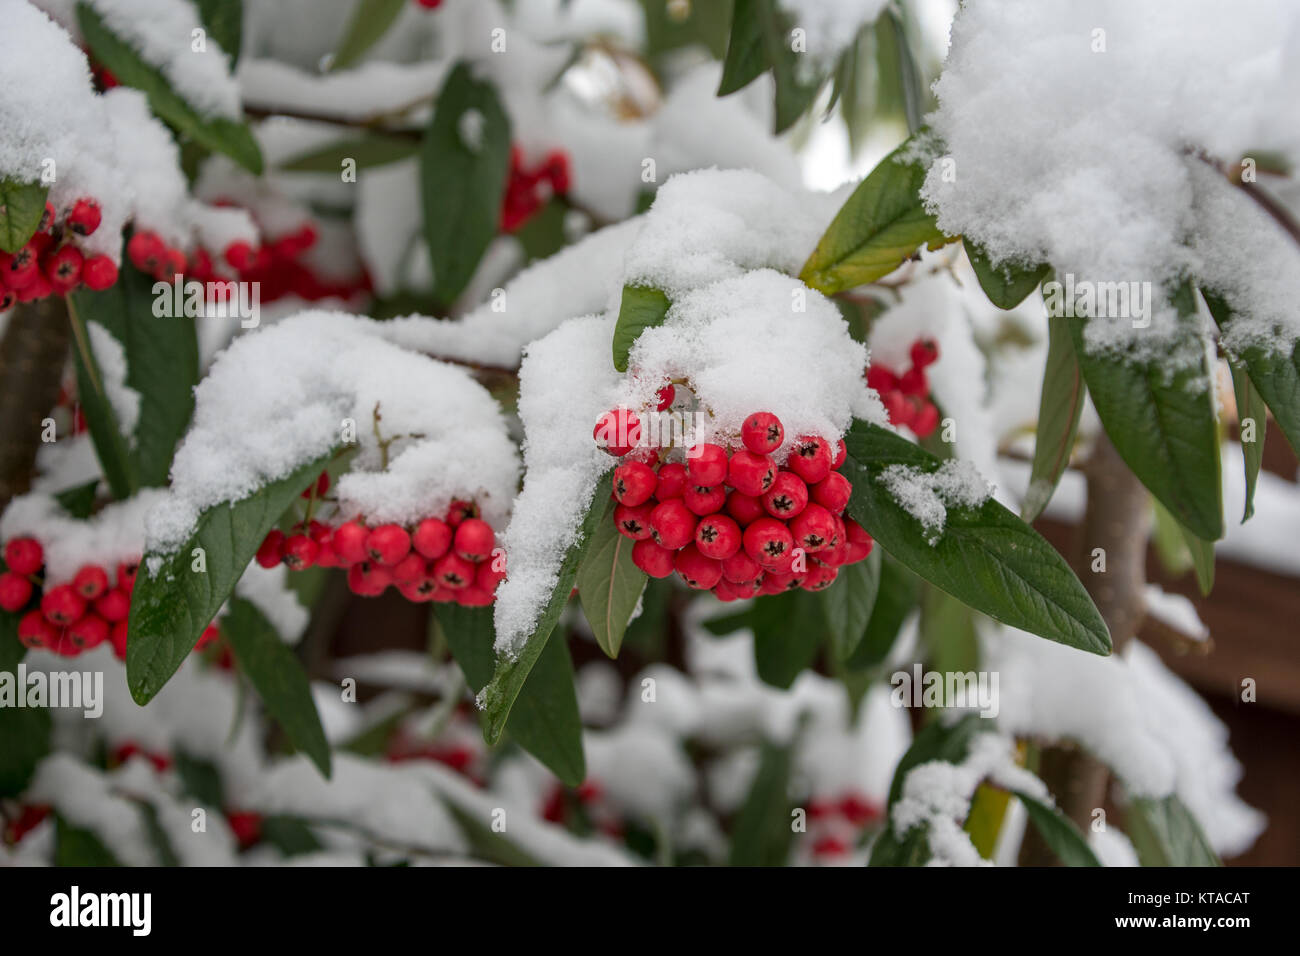 Cotoneaster cornubia tree berries covered in snow Stock Photo